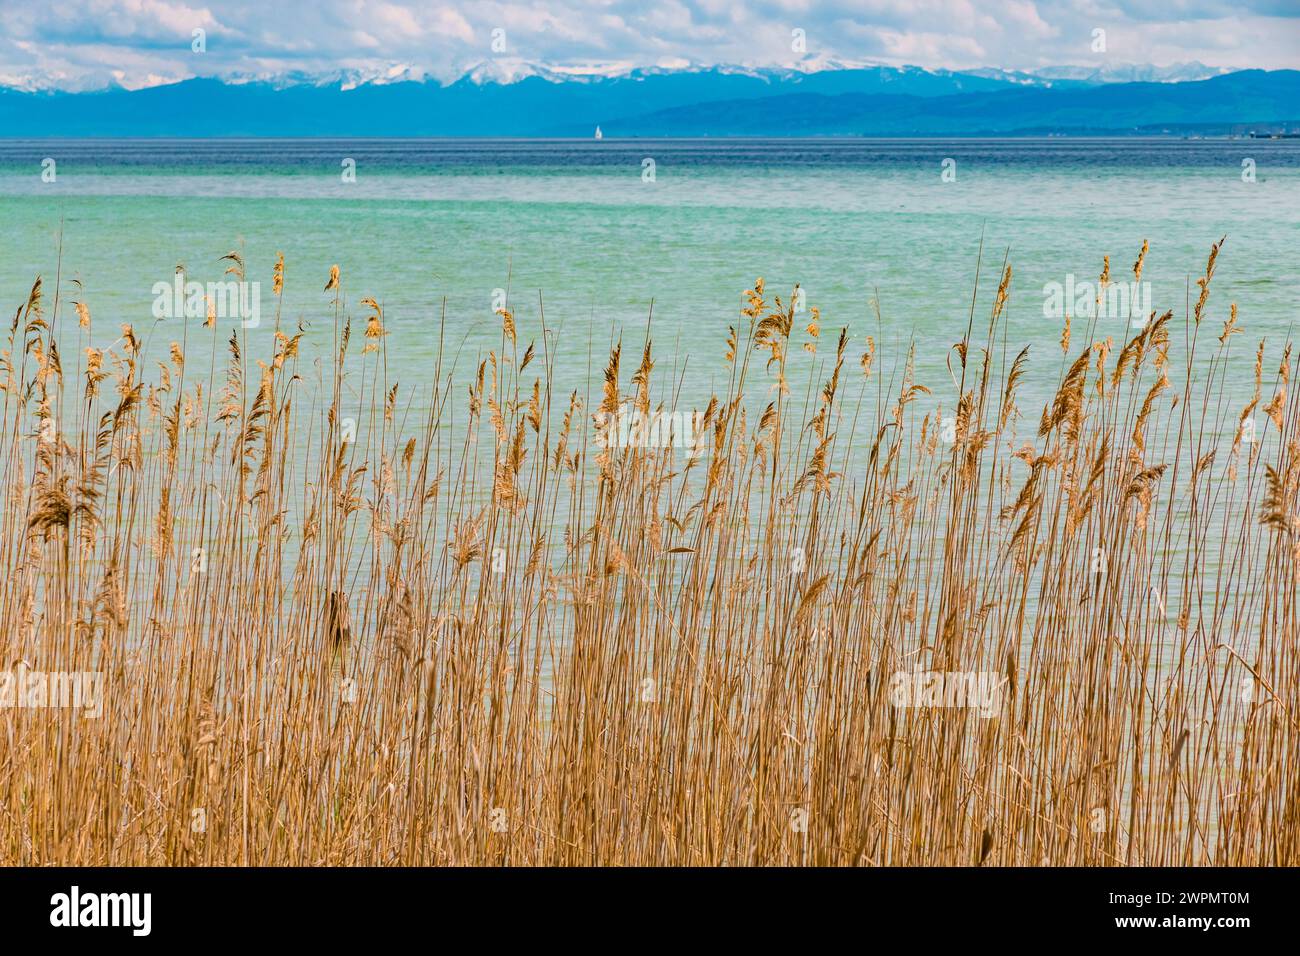 Beautiful landscape view of dry reed on the shore of the famous Lake Constance (Bodensee) in Germany with the Alps in the background. Stock Photo